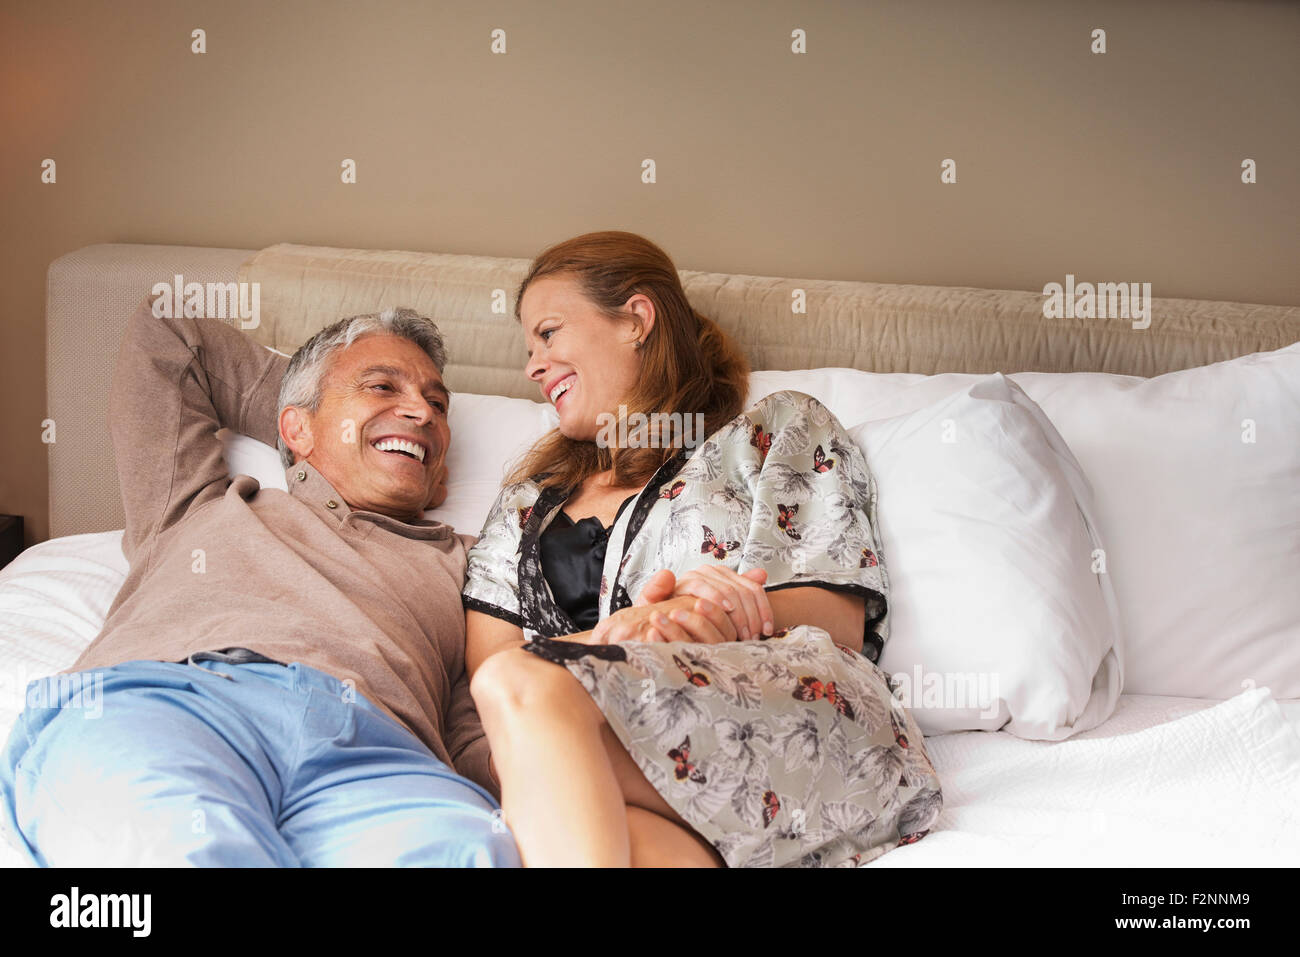 Laughing couple relaxing on bed Stock Photo